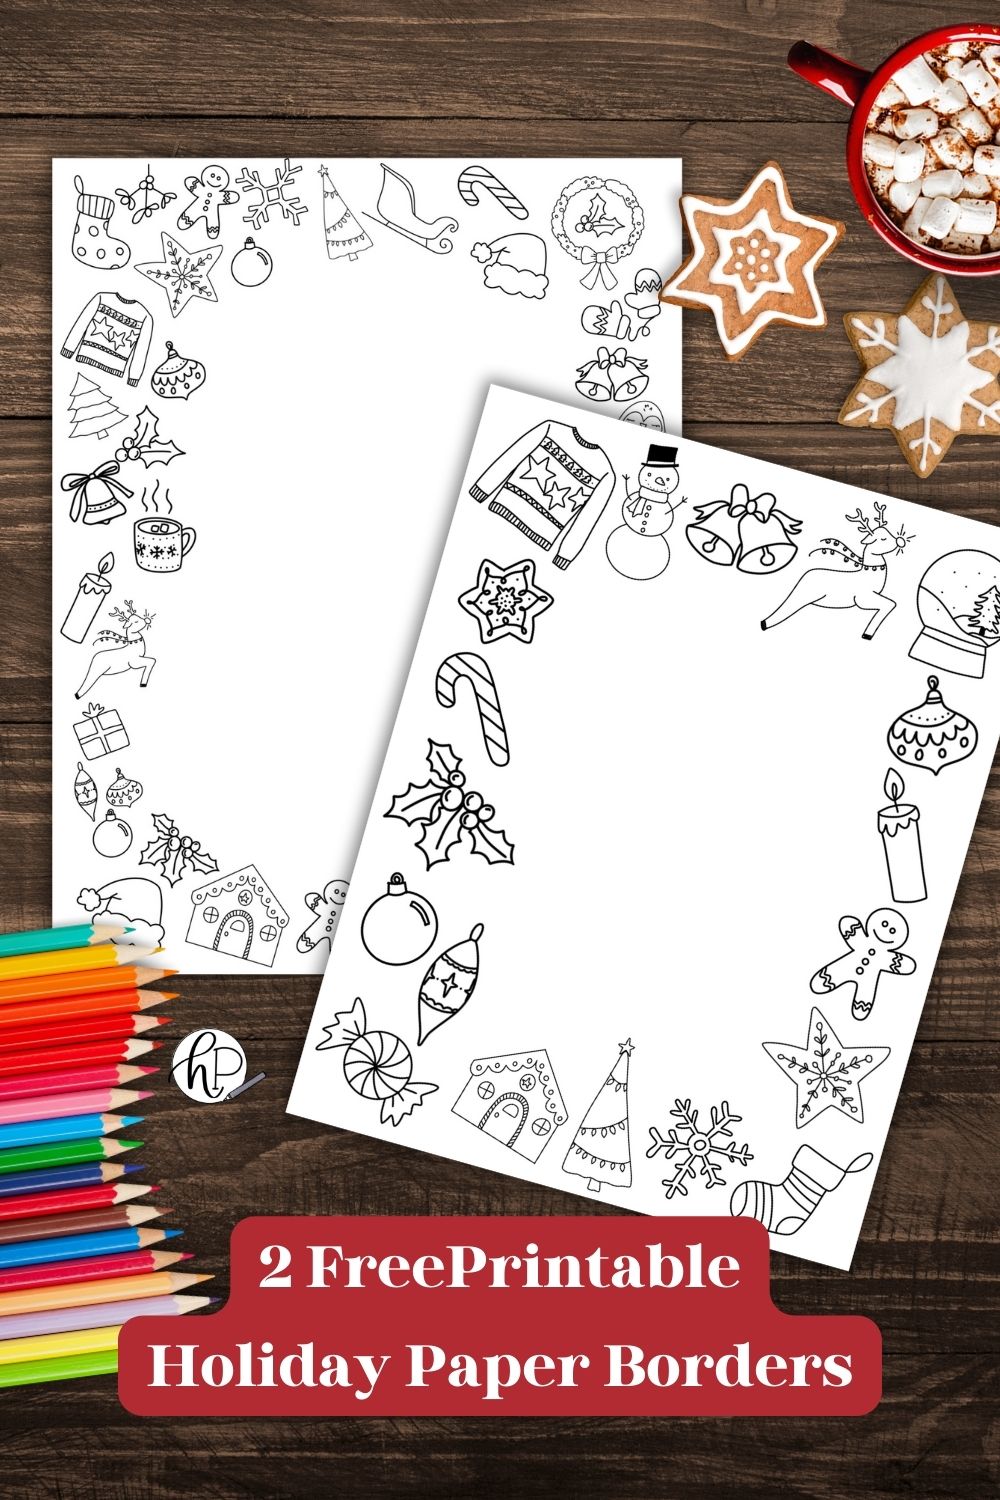 Christmas border paper printables for your holiday stationery on wood table with pencil crayons and text title